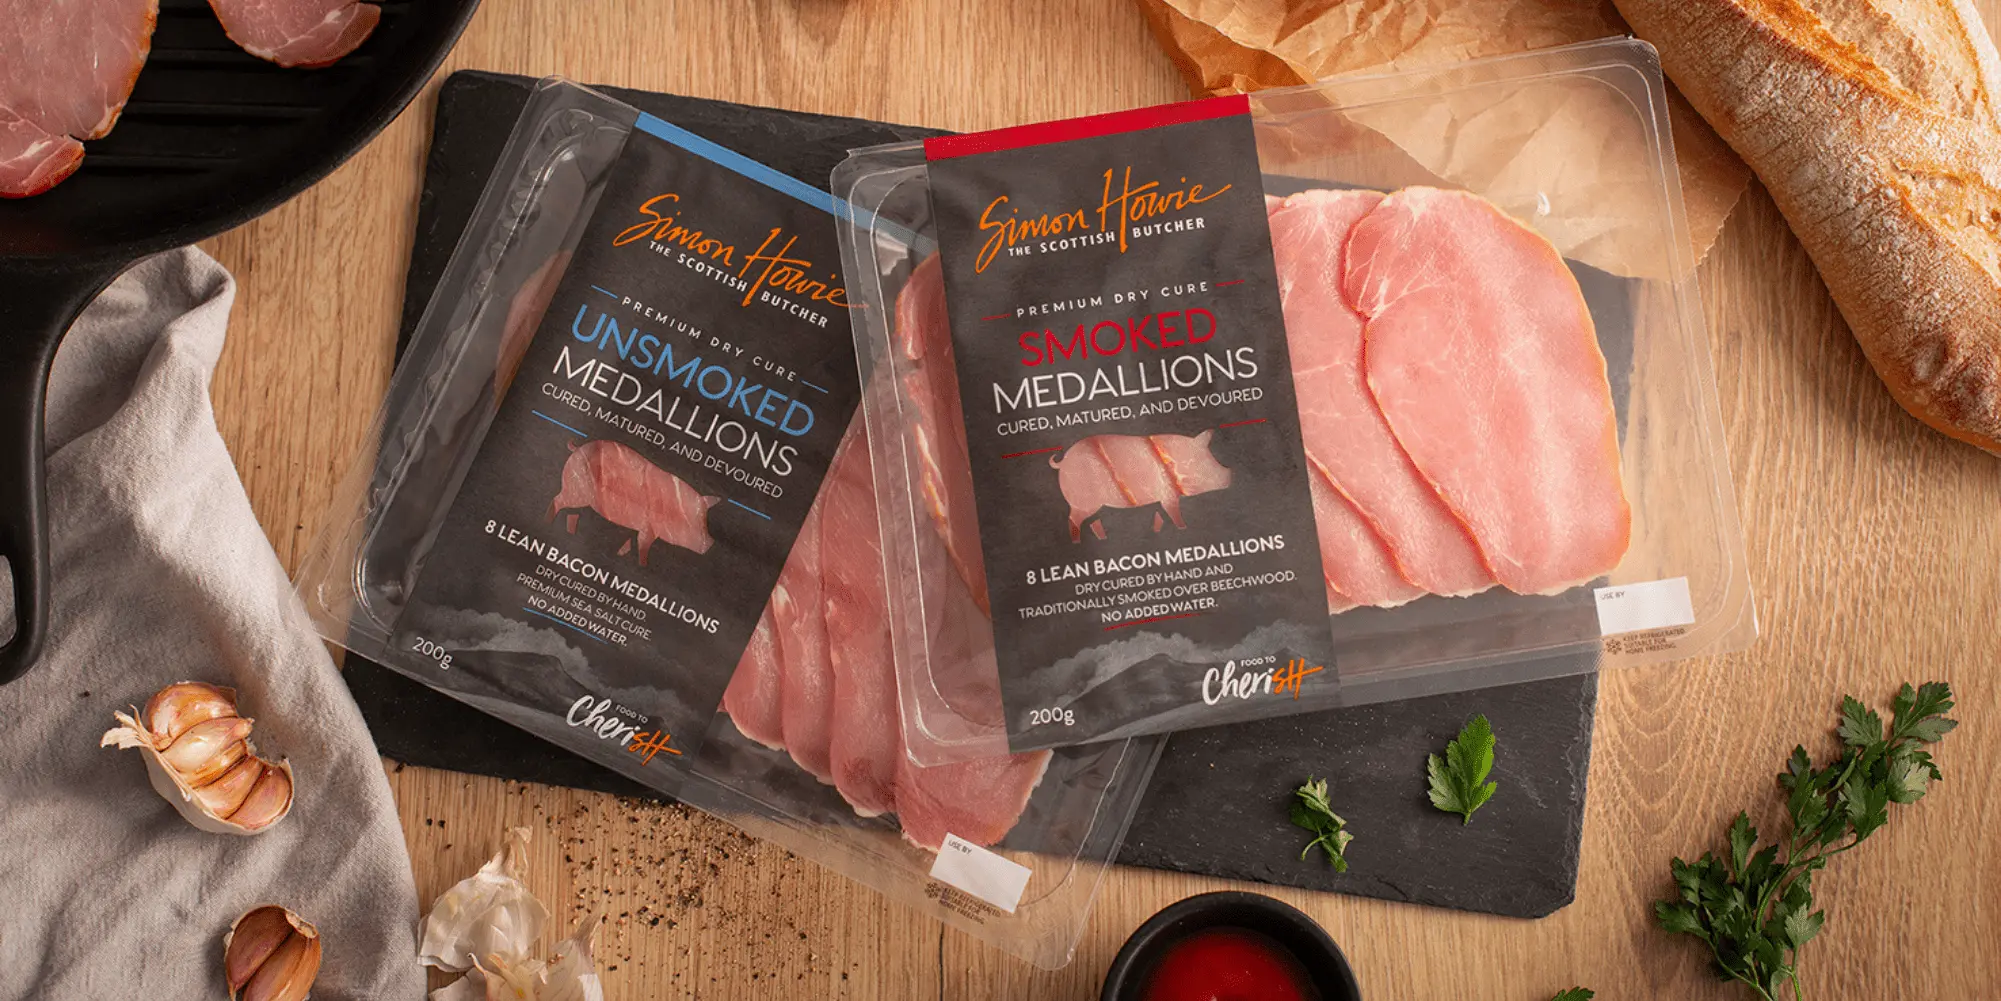 aldi smoked bacon medallions - What is the difference between bacon medallions and bacon